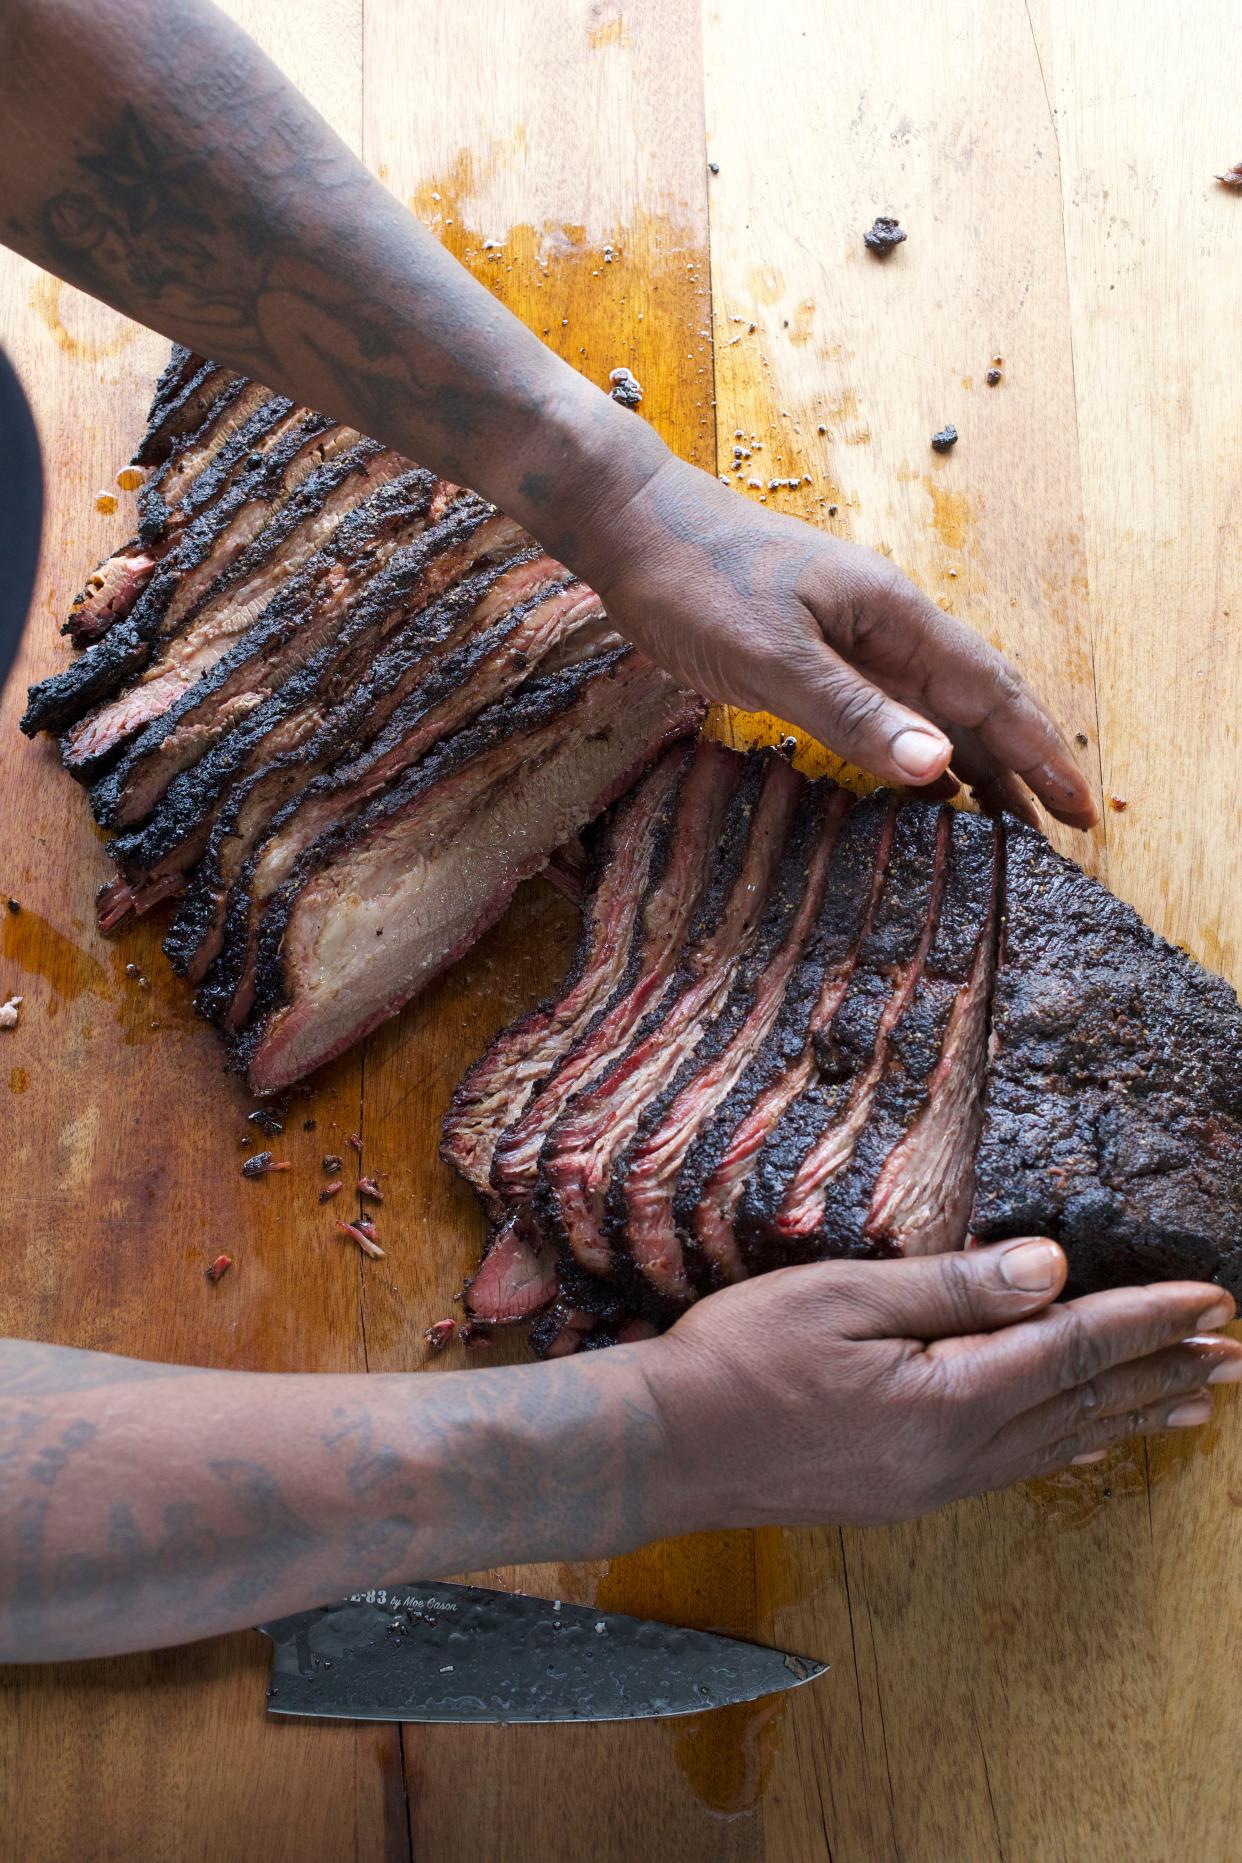 Barbecue brisket from "Big Moe's Big Book of BBQ," coming out on May 7 by Moe Cason.